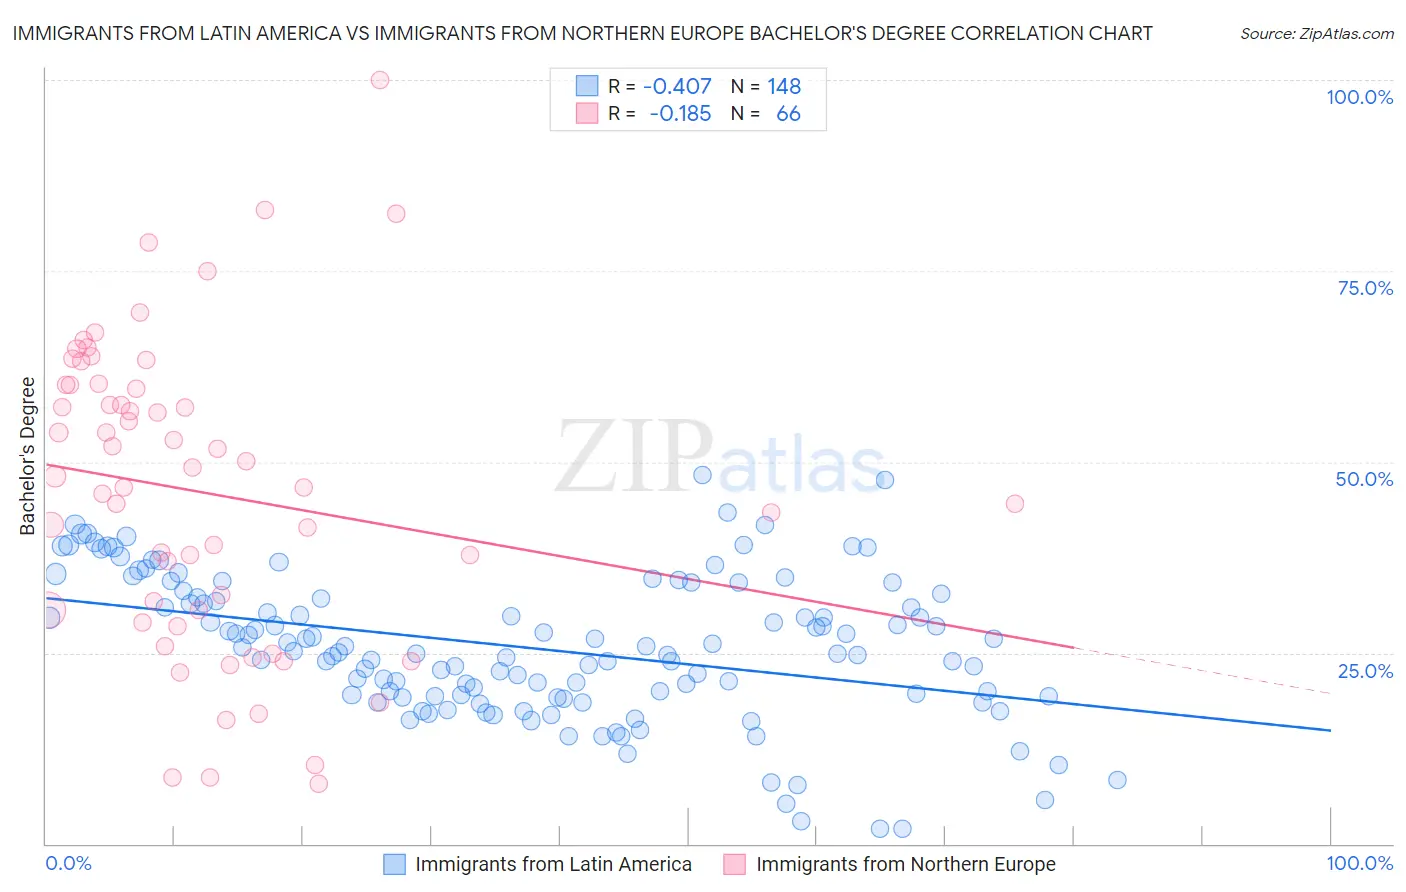 Immigrants from Latin America vs Immigrants from Northern Europe Bachelor's Degree